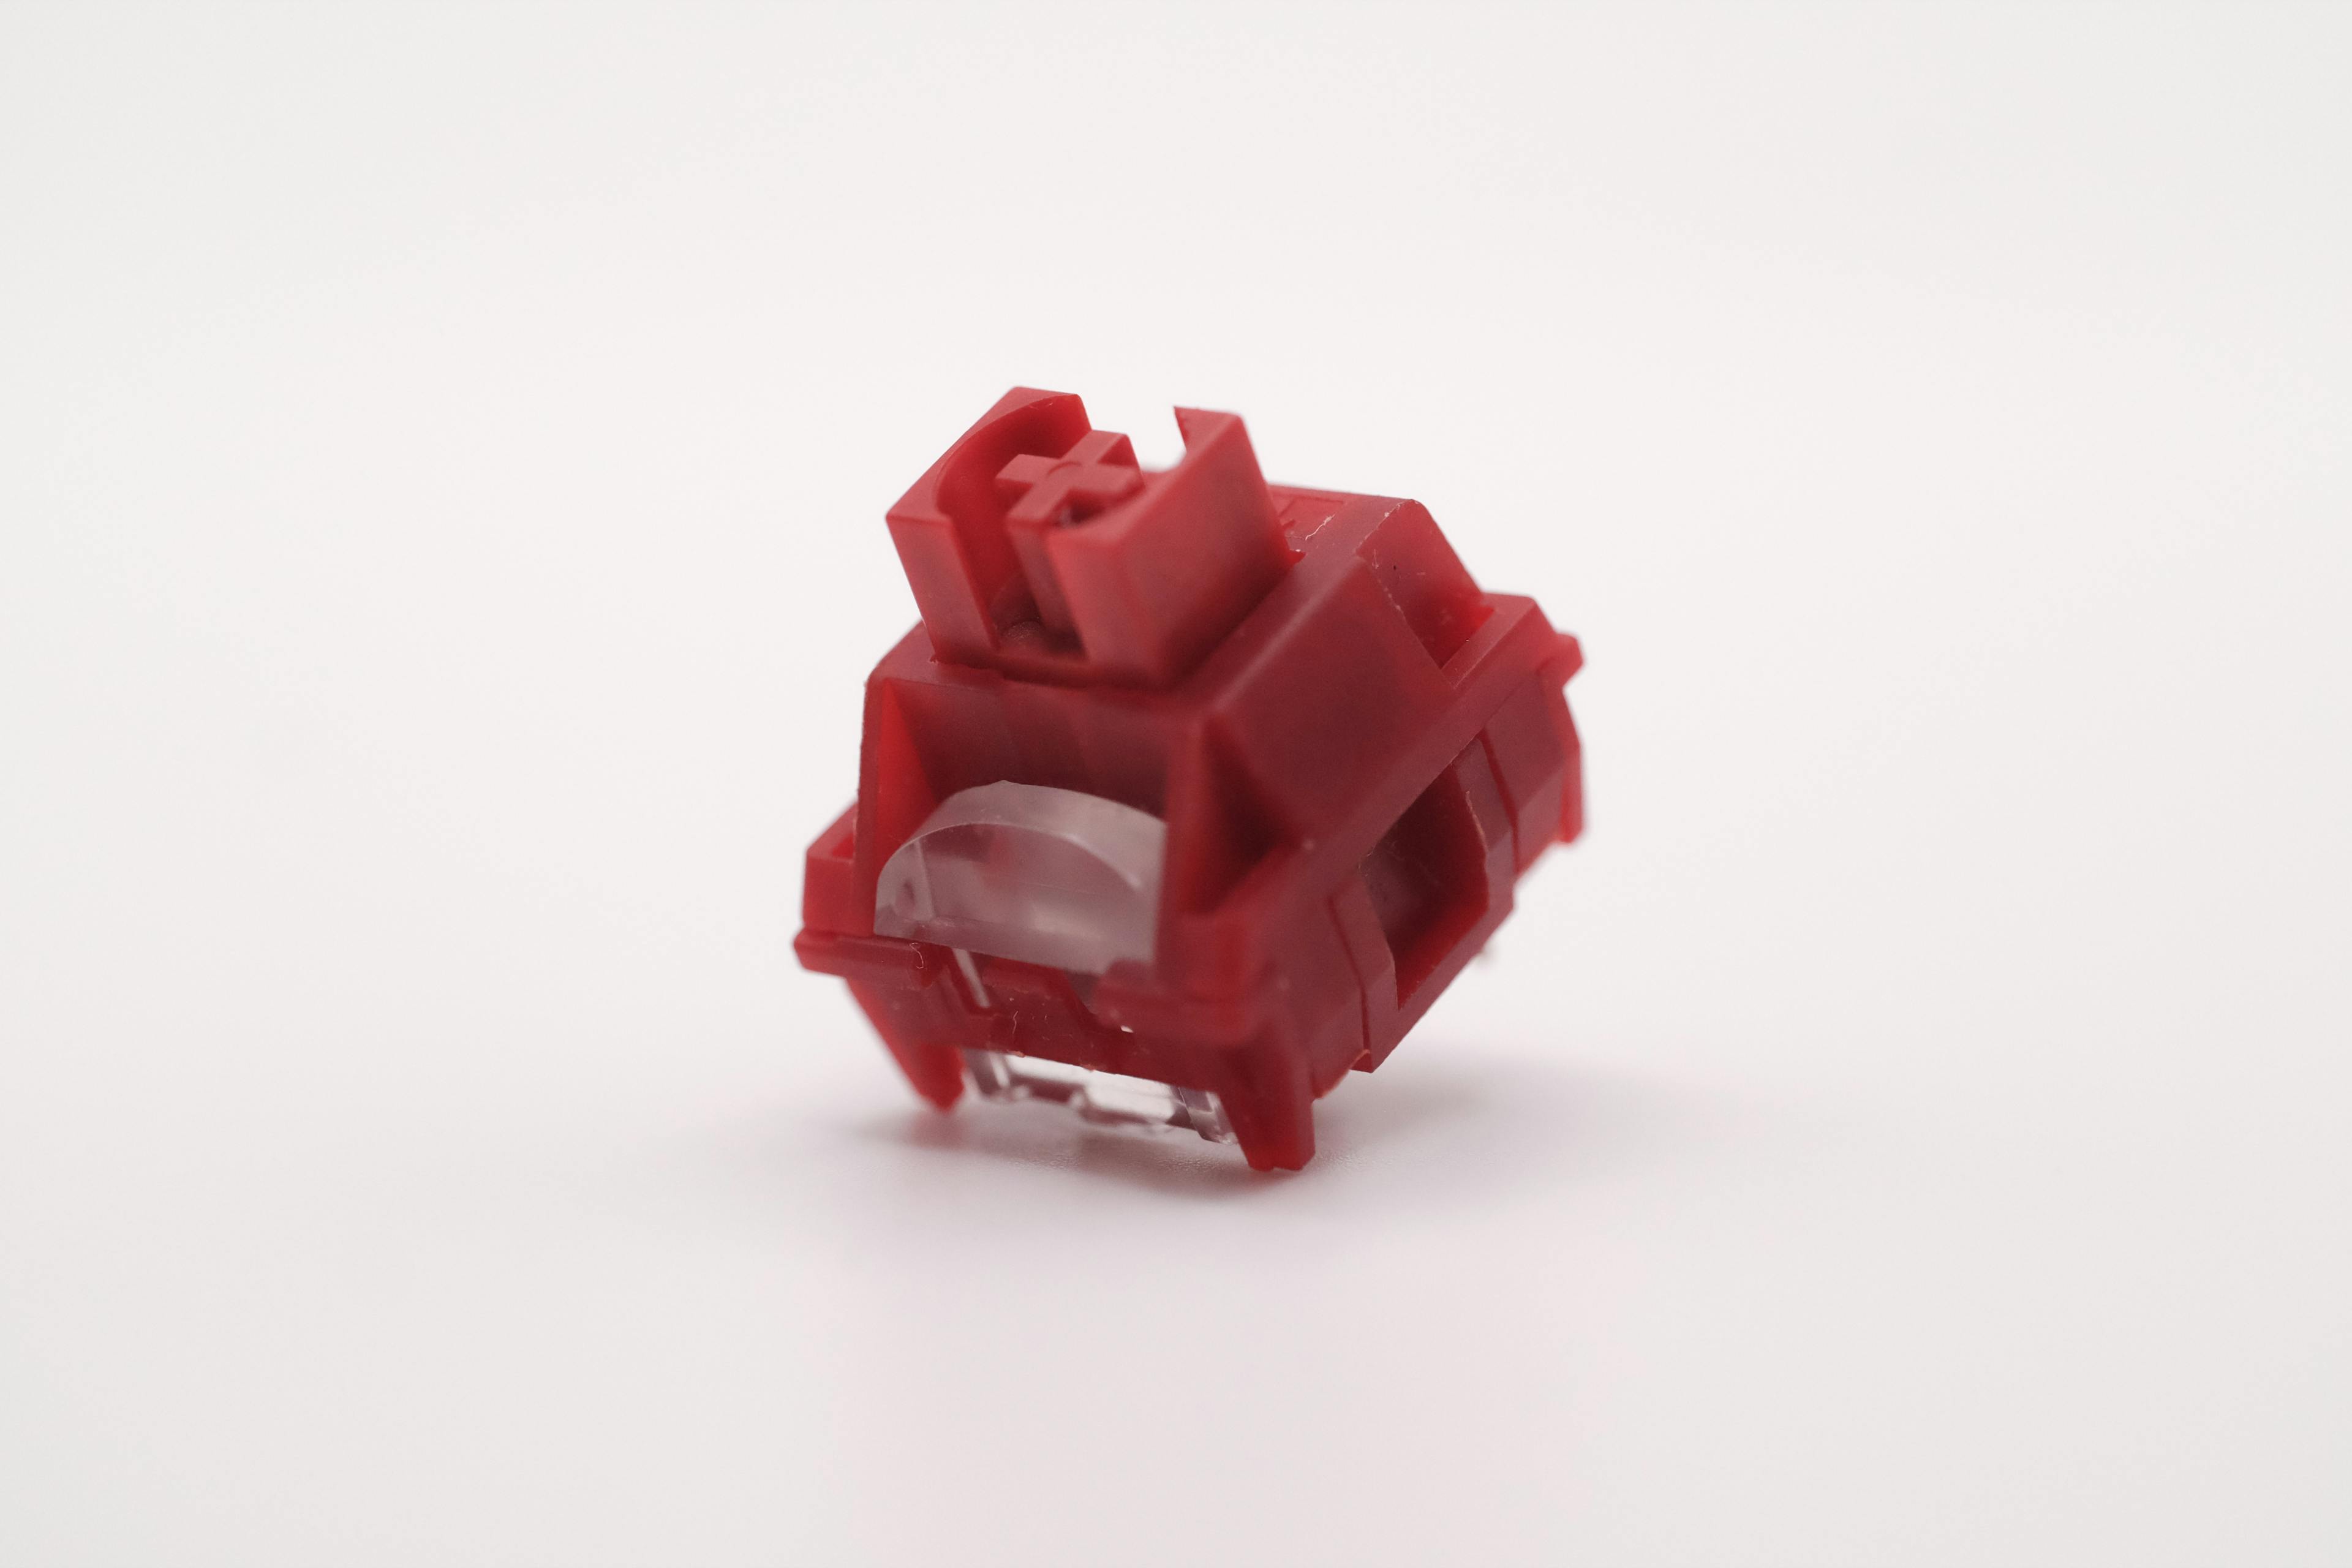 TTC Flame Red Linear Switches